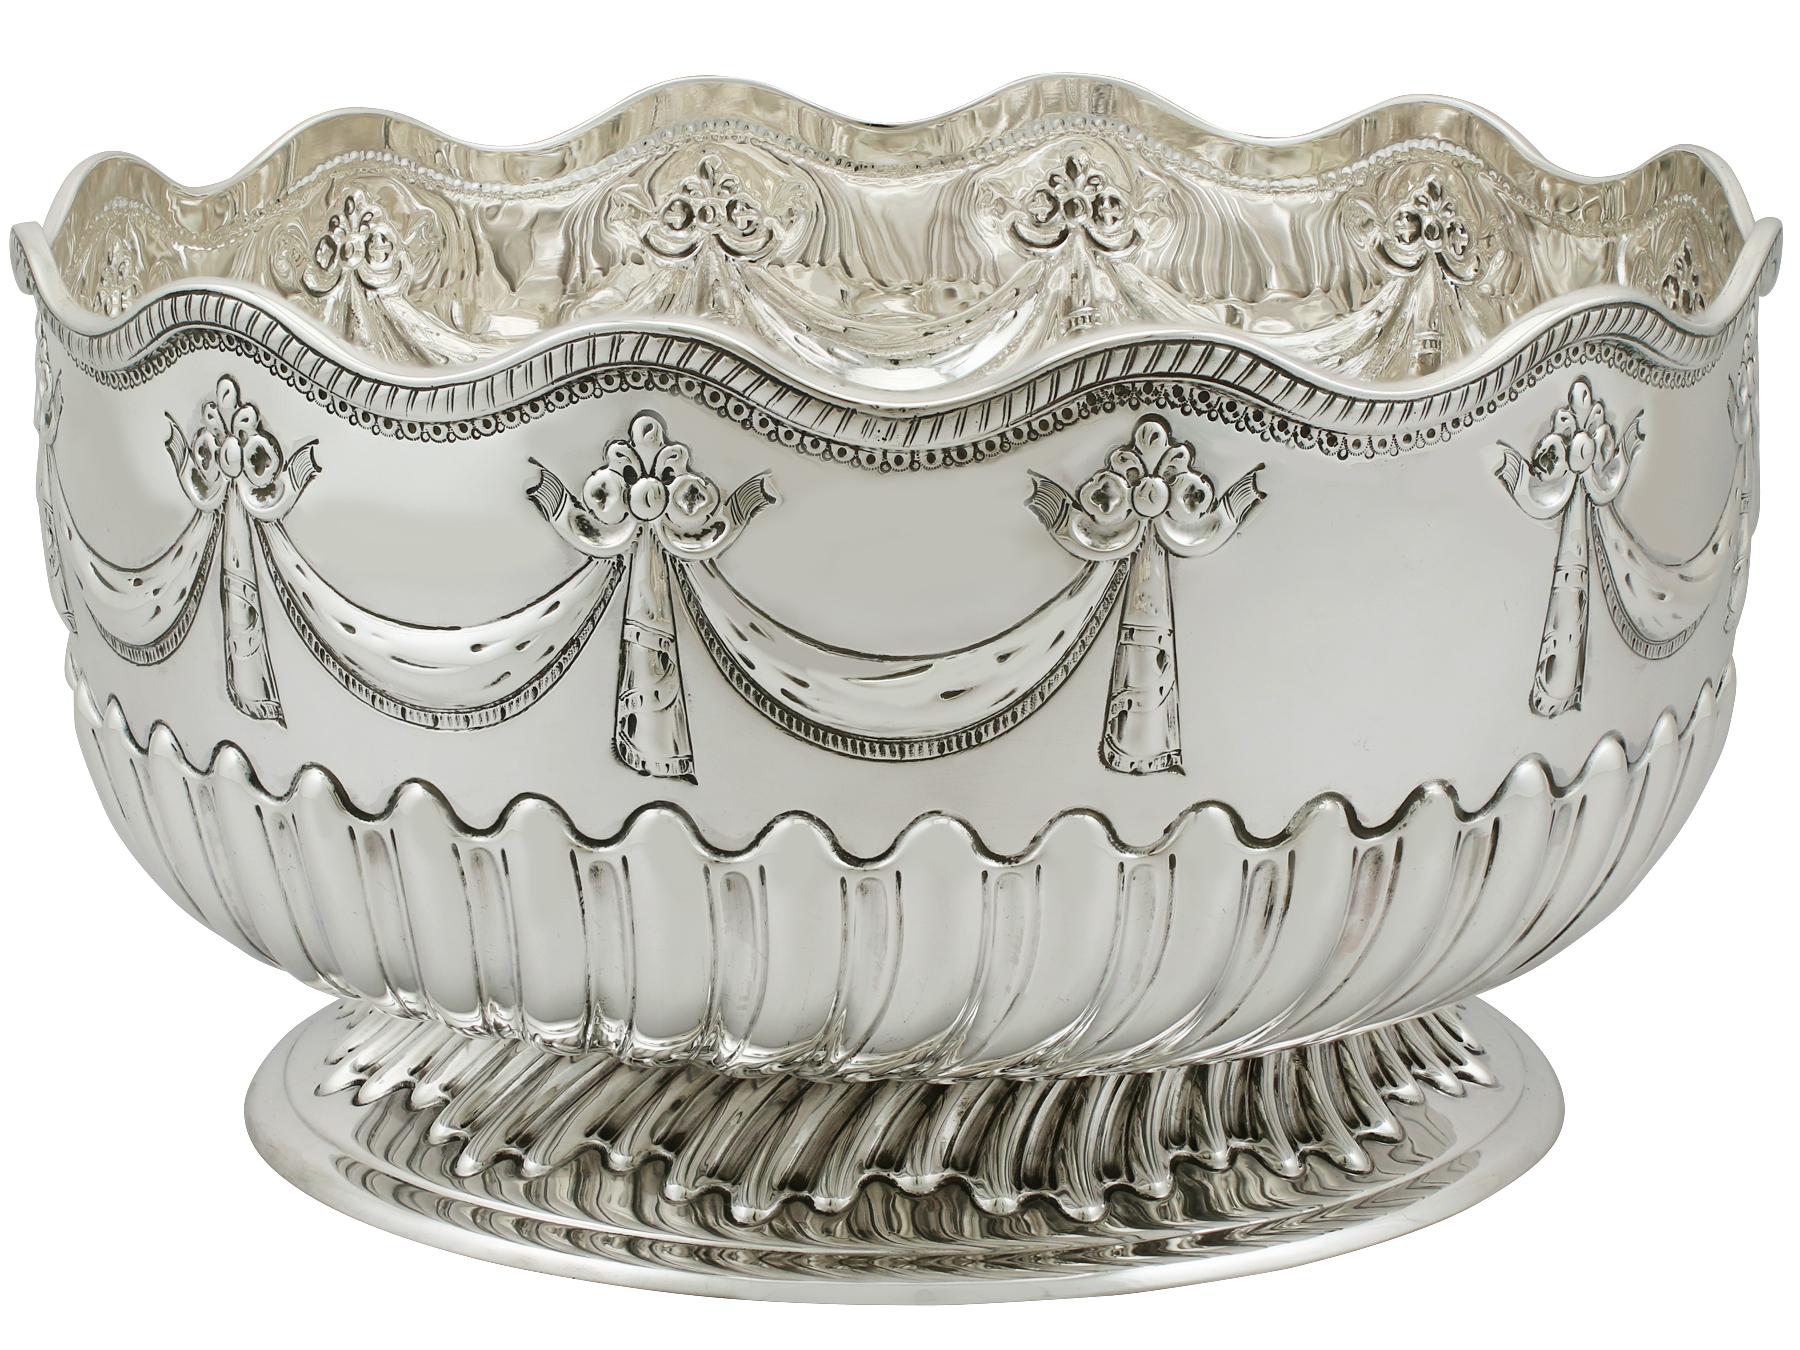 An exceptional, fine and impressive antique Victorian English sterling silver presentation bowl; an addition to our ornamental silverware collection.

This exceptional antique sterling silver bowl has a circular rounded form onto a circular